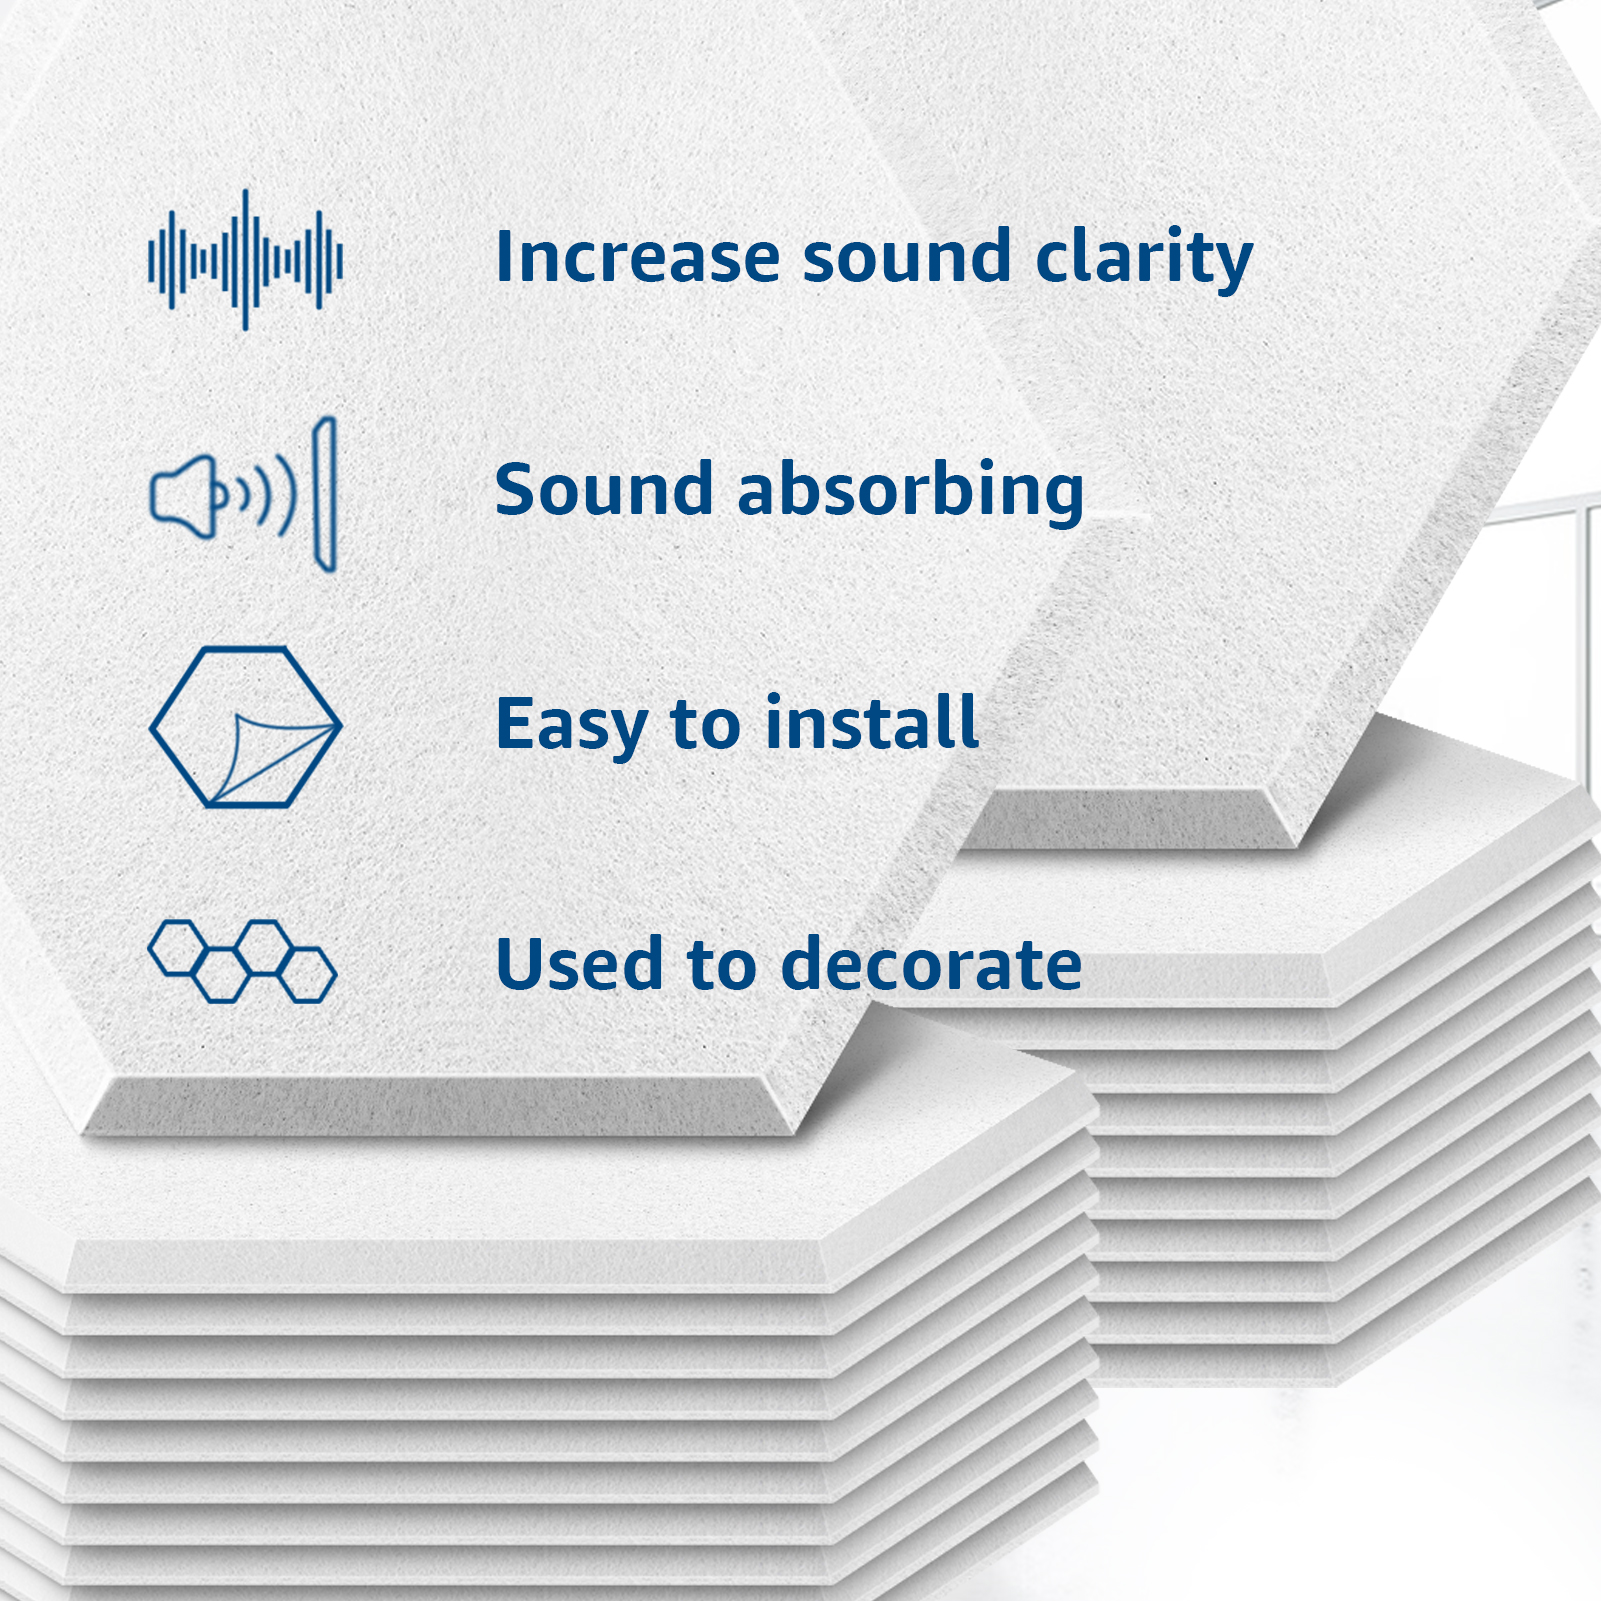 Hexagonal Self-adhesive Acoustic Panels Sound Absorbing Soundproof